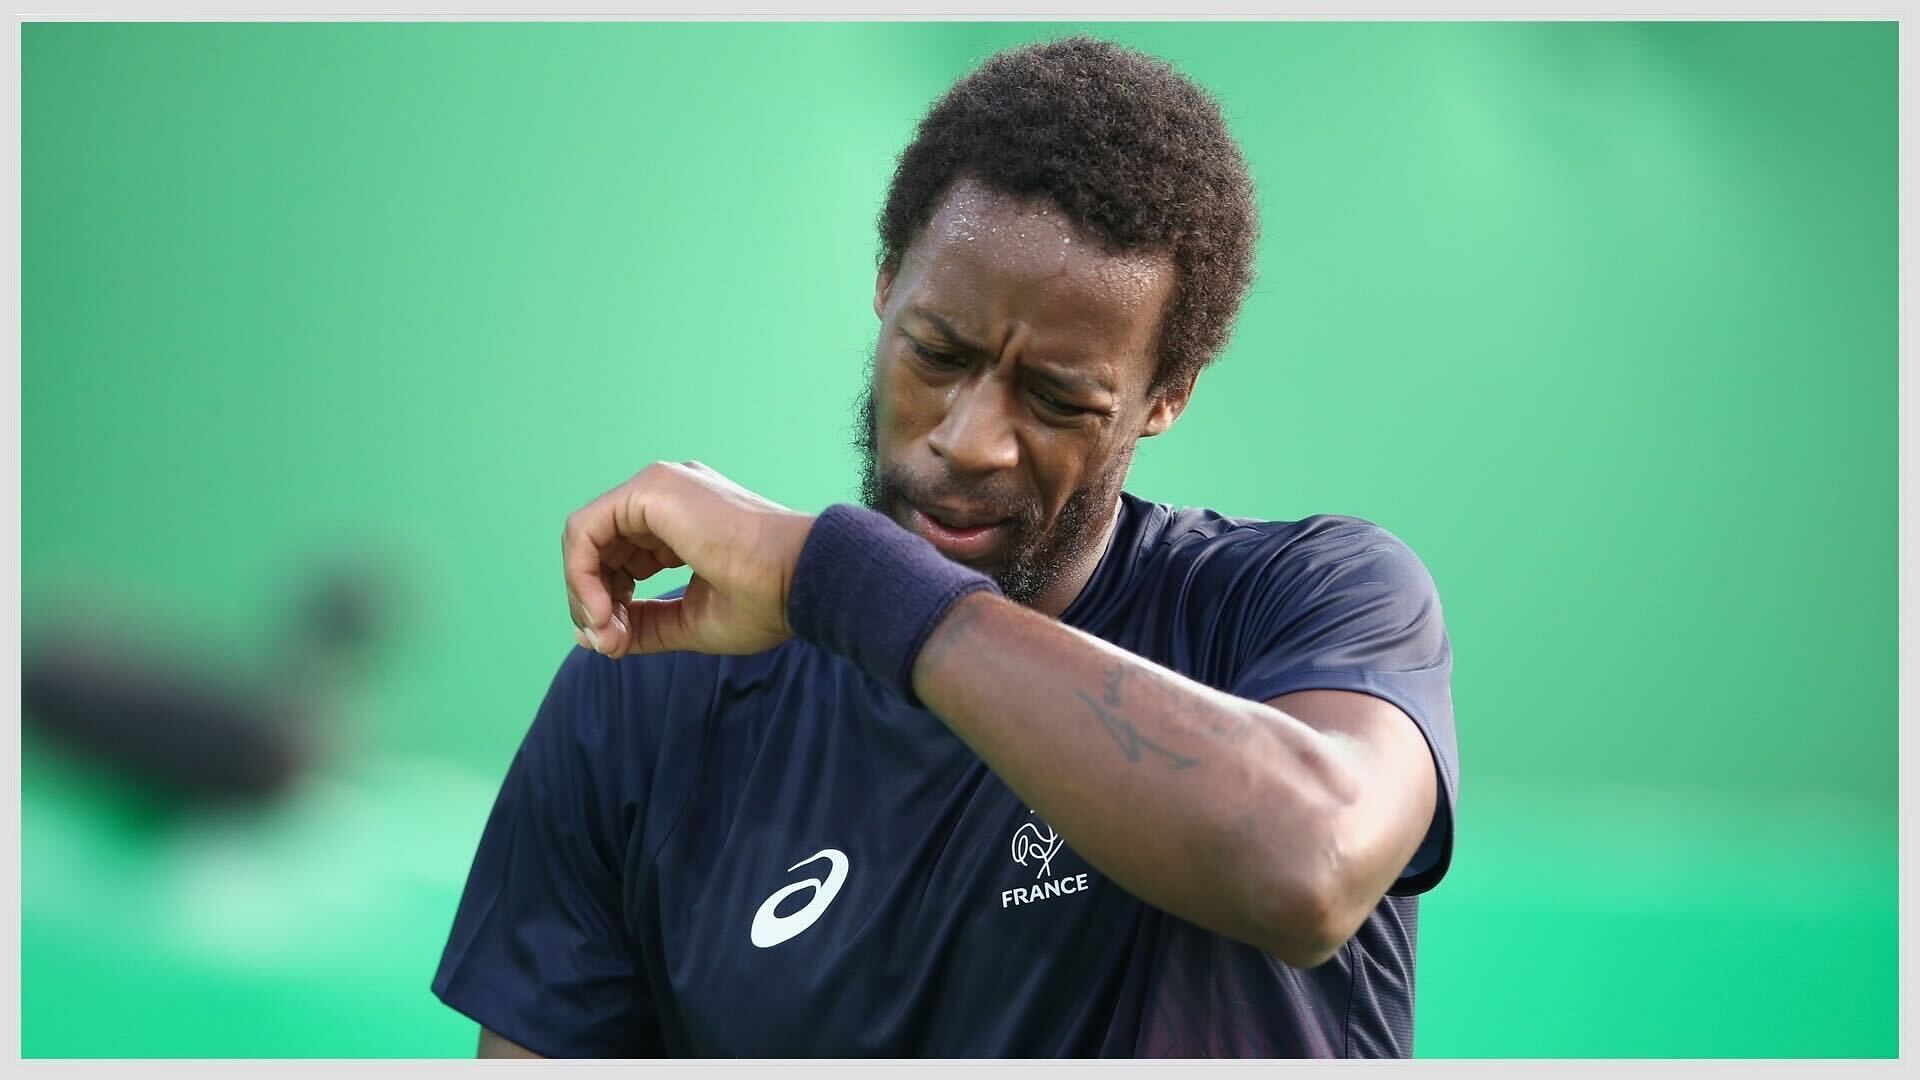 Gael Monfils contemplates uncertain future at the French Open